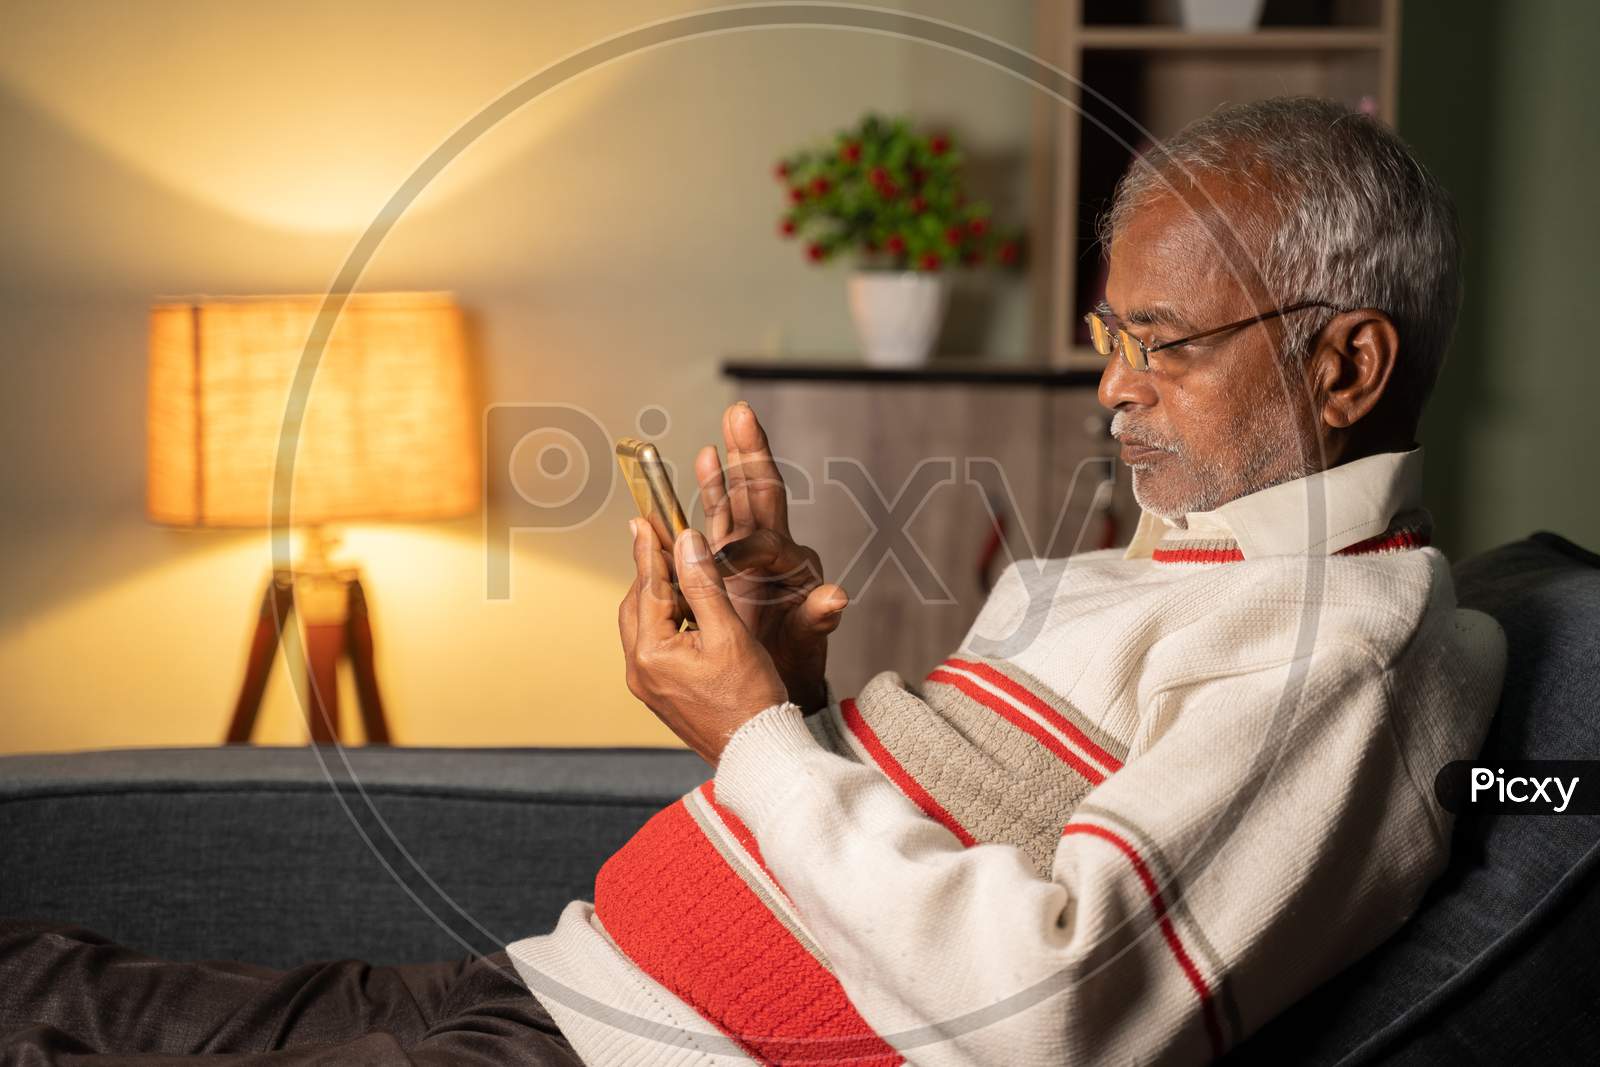 Old Man Busy Using Mobile Phone At Home While Sleeping On Sofa - Concept Of Senior People Using Technology, Internet And Social Media.